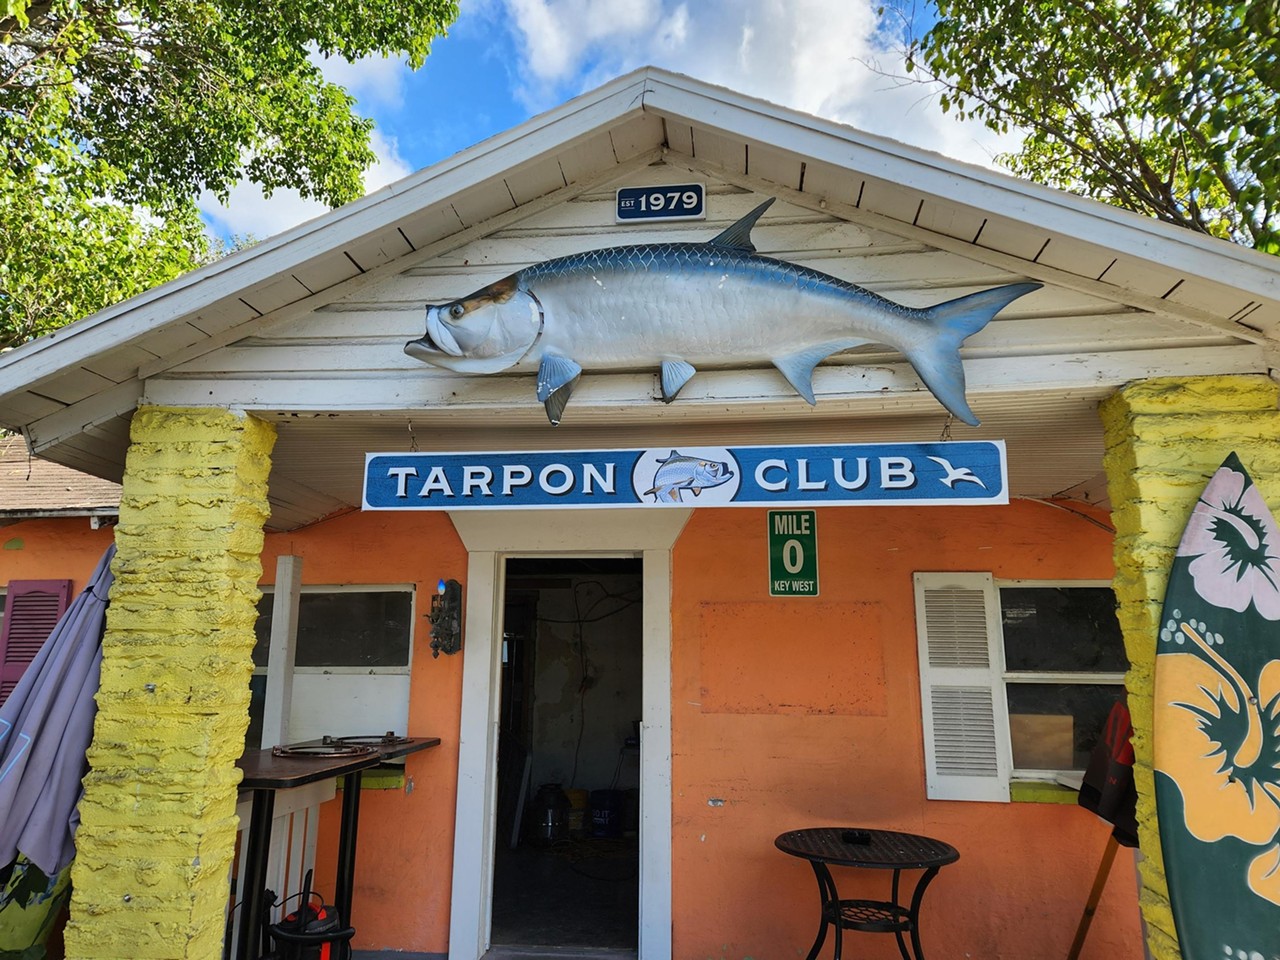 Friendly Tarpon Tavern
3120 W Gandy Blvd., Tampa
Formerly known as Barefoot Billy’s Friendly Tavern, this quaint “dive bar” on South Gandy has undergone some major renovations in recent months under new ownership. While the bar currently doesn’t serve liquor, it does offer a hefty selection of craft beers, seltzers and even sake-based spirits. For now, patrons can order hot dogs and snacks like boiled peanuts, but the food menu will soon expand to include more game day favorites. And, yes, say hi to Jourdan while you’re there.